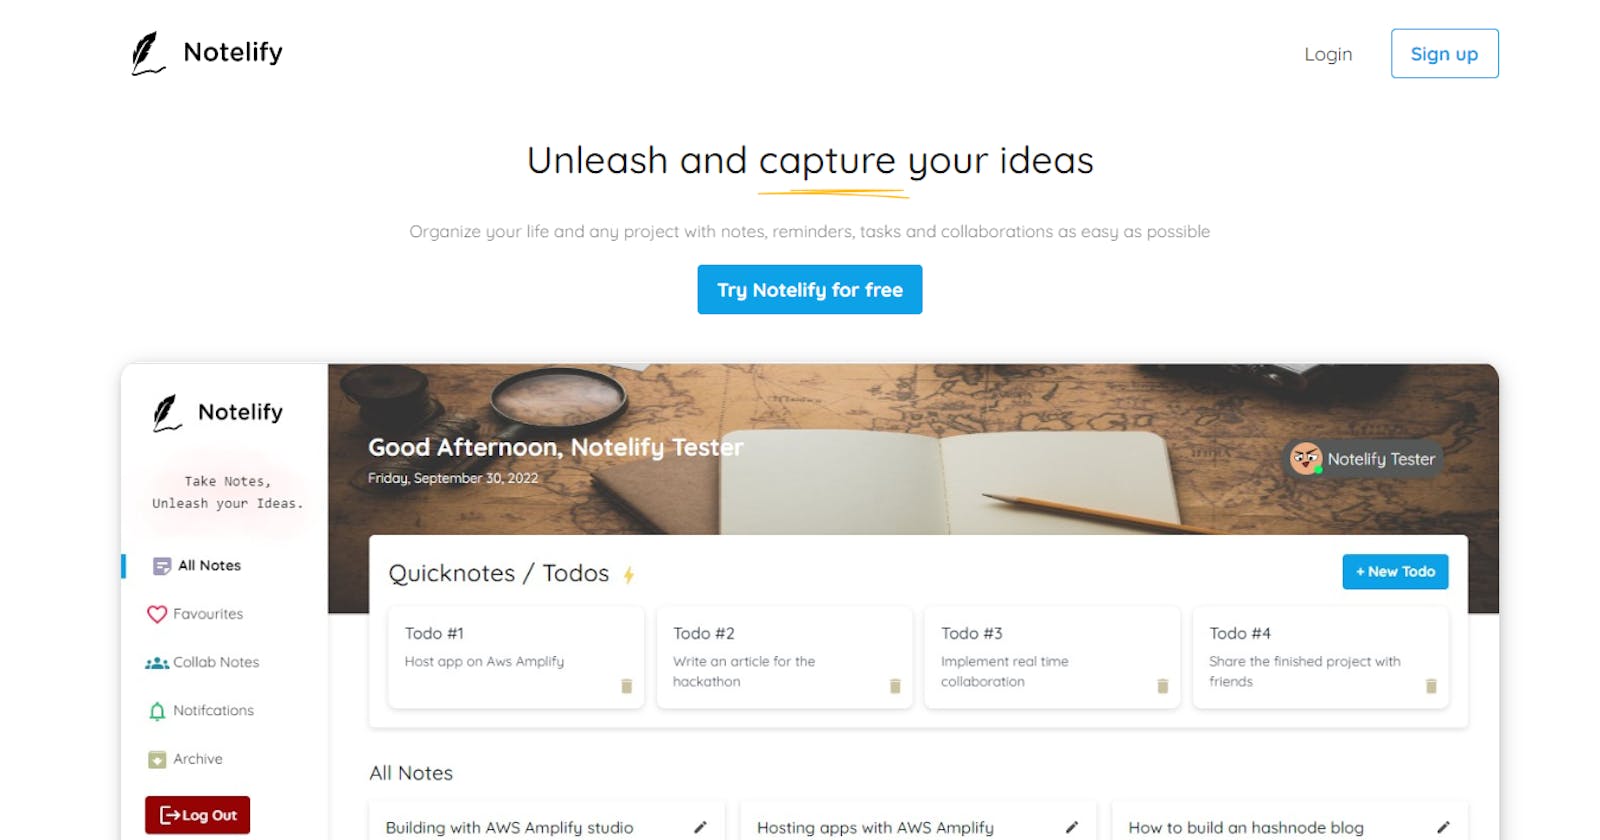 Notelify - Take notes and unleash your ideas with friends in real time.